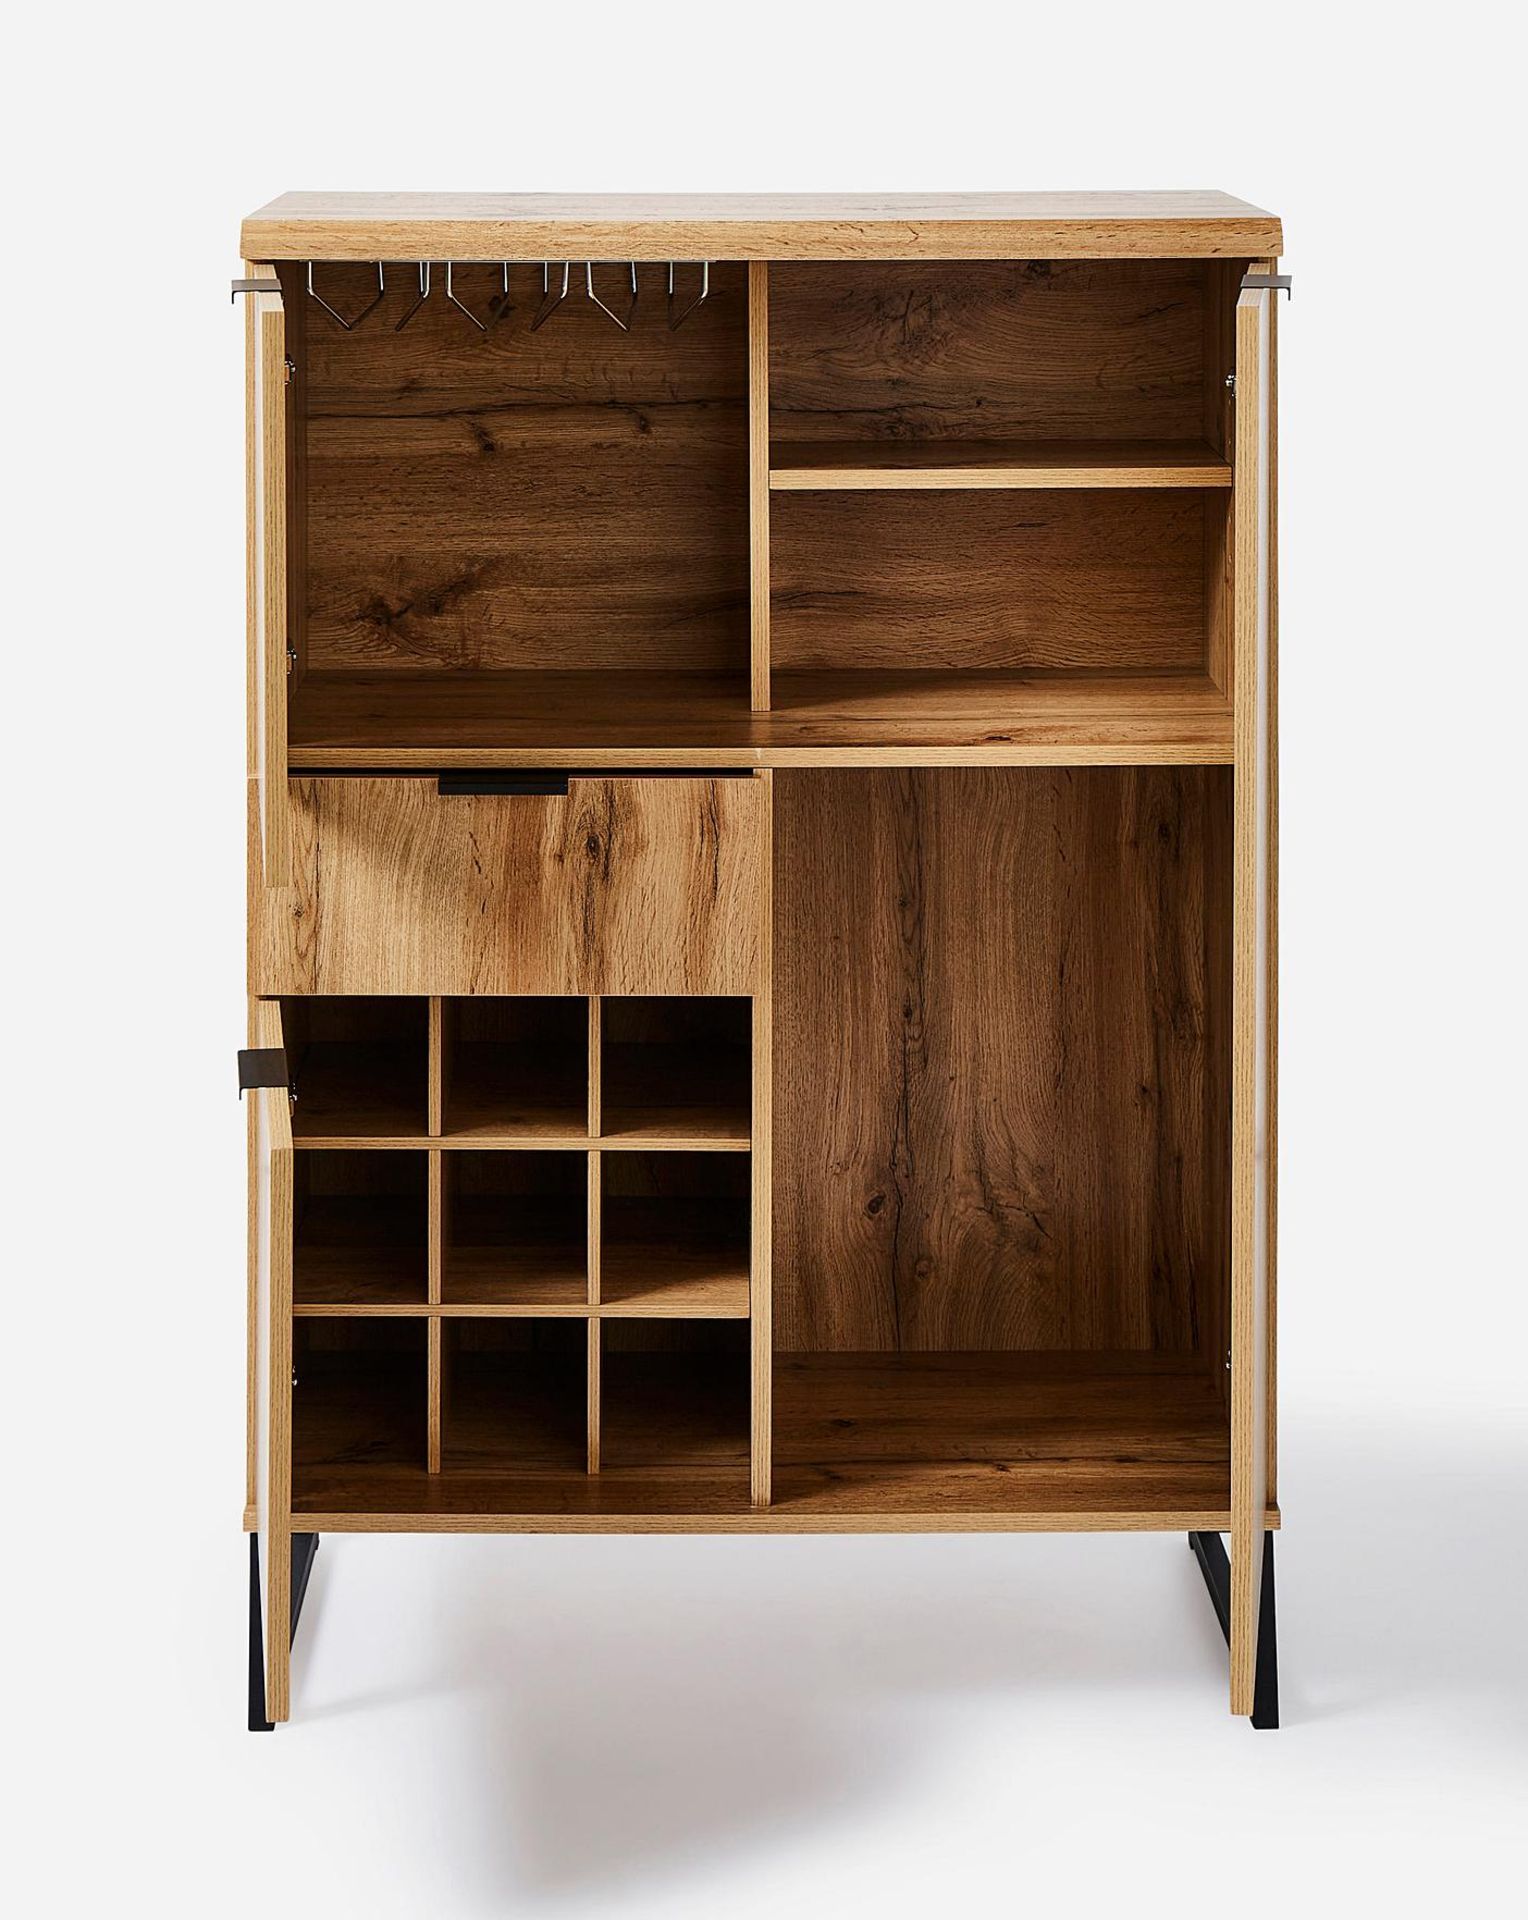 BRAND NEW SHOREDITCH Drinks Cabinet. OAK. RRP £299. The Shoreditch Range is a contemporary and - Image 3 of 8